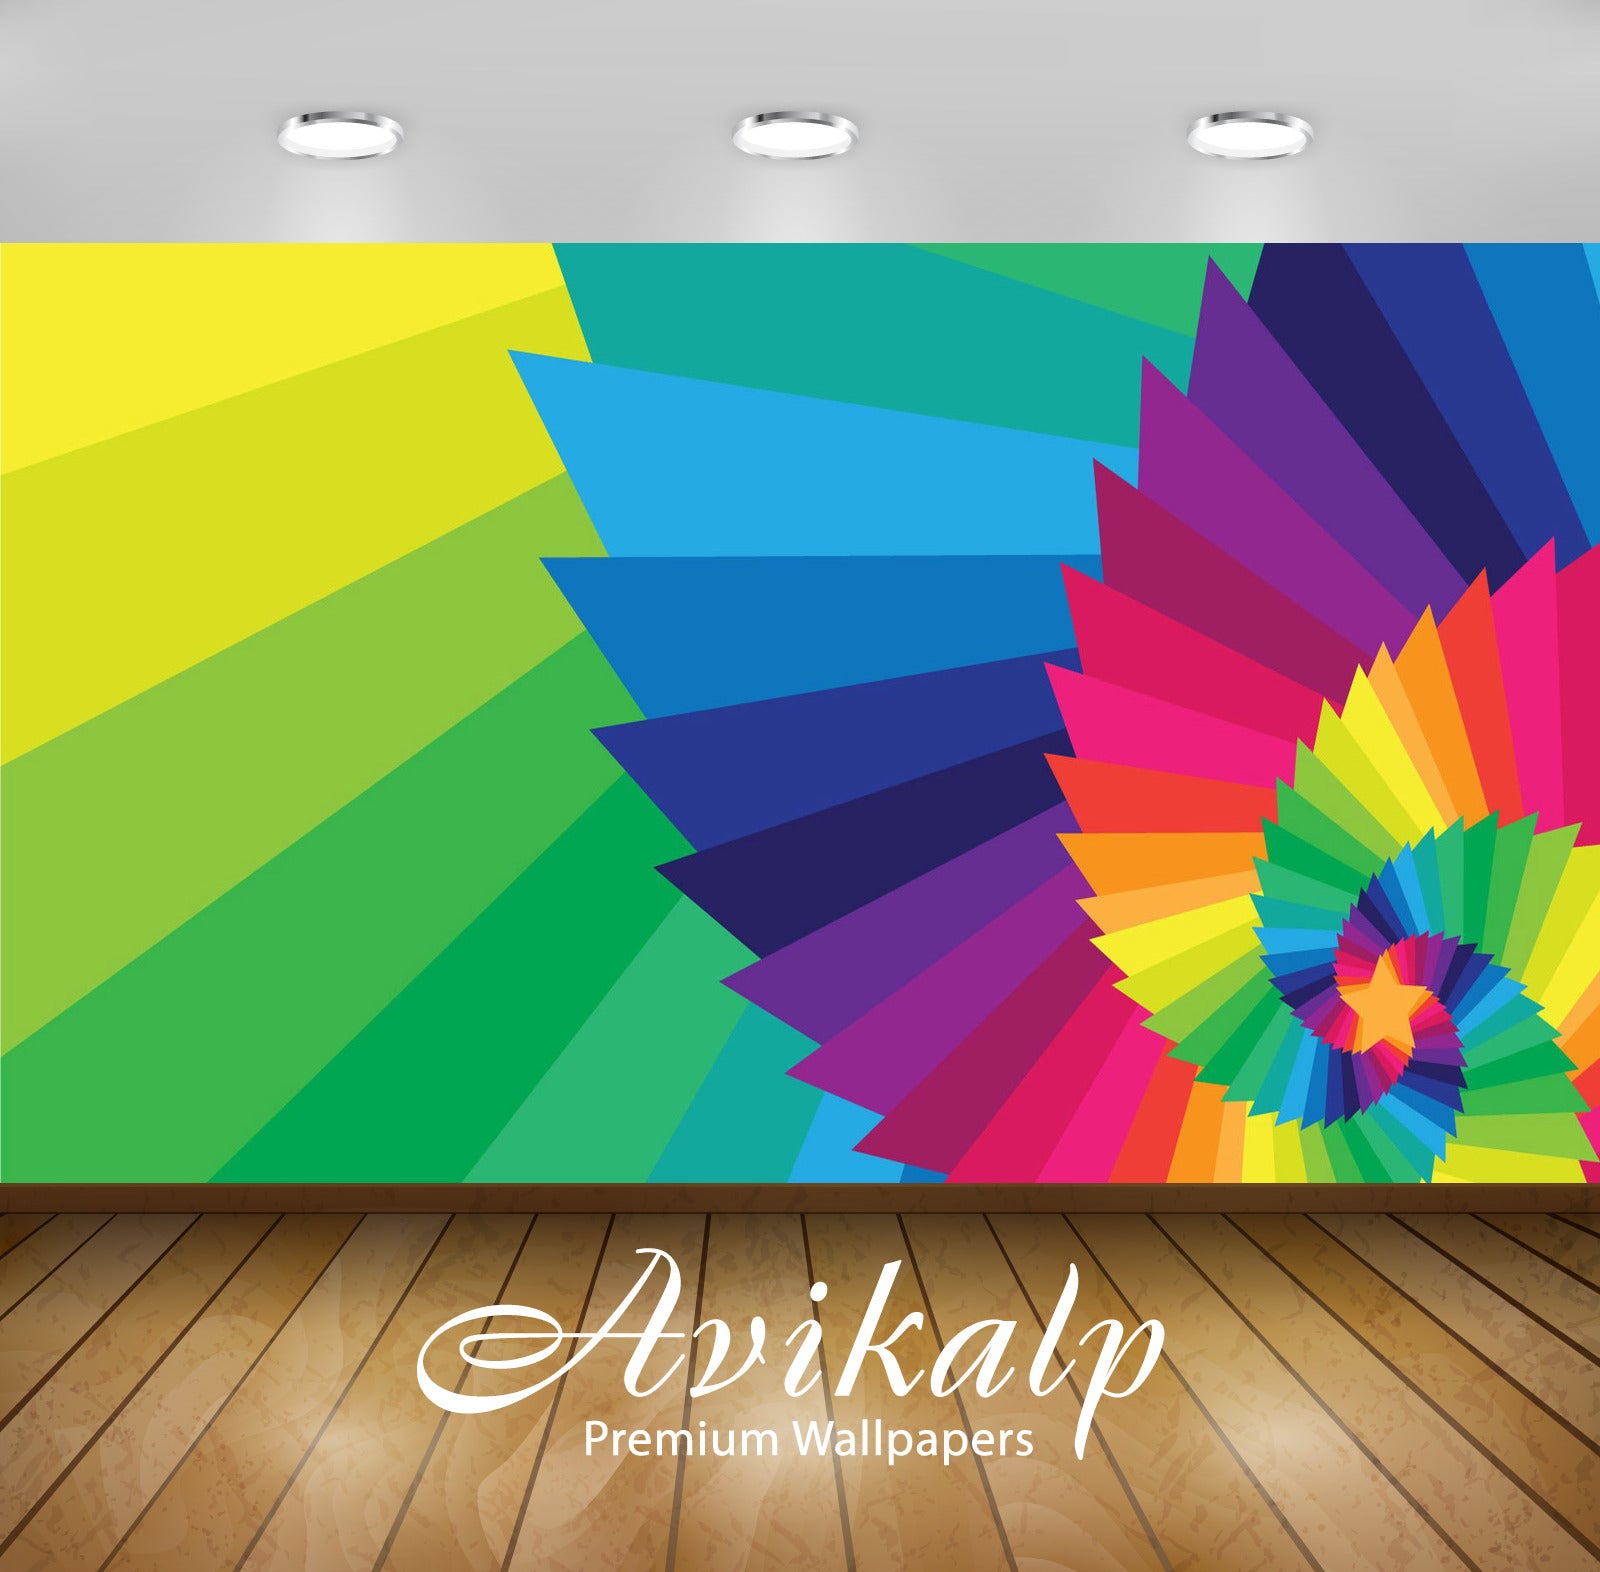 Avikalp Exclusive Awi4130 Color Spiral Full HD Wallpapers for Living room, Hall, Kids Room, Kitchen,